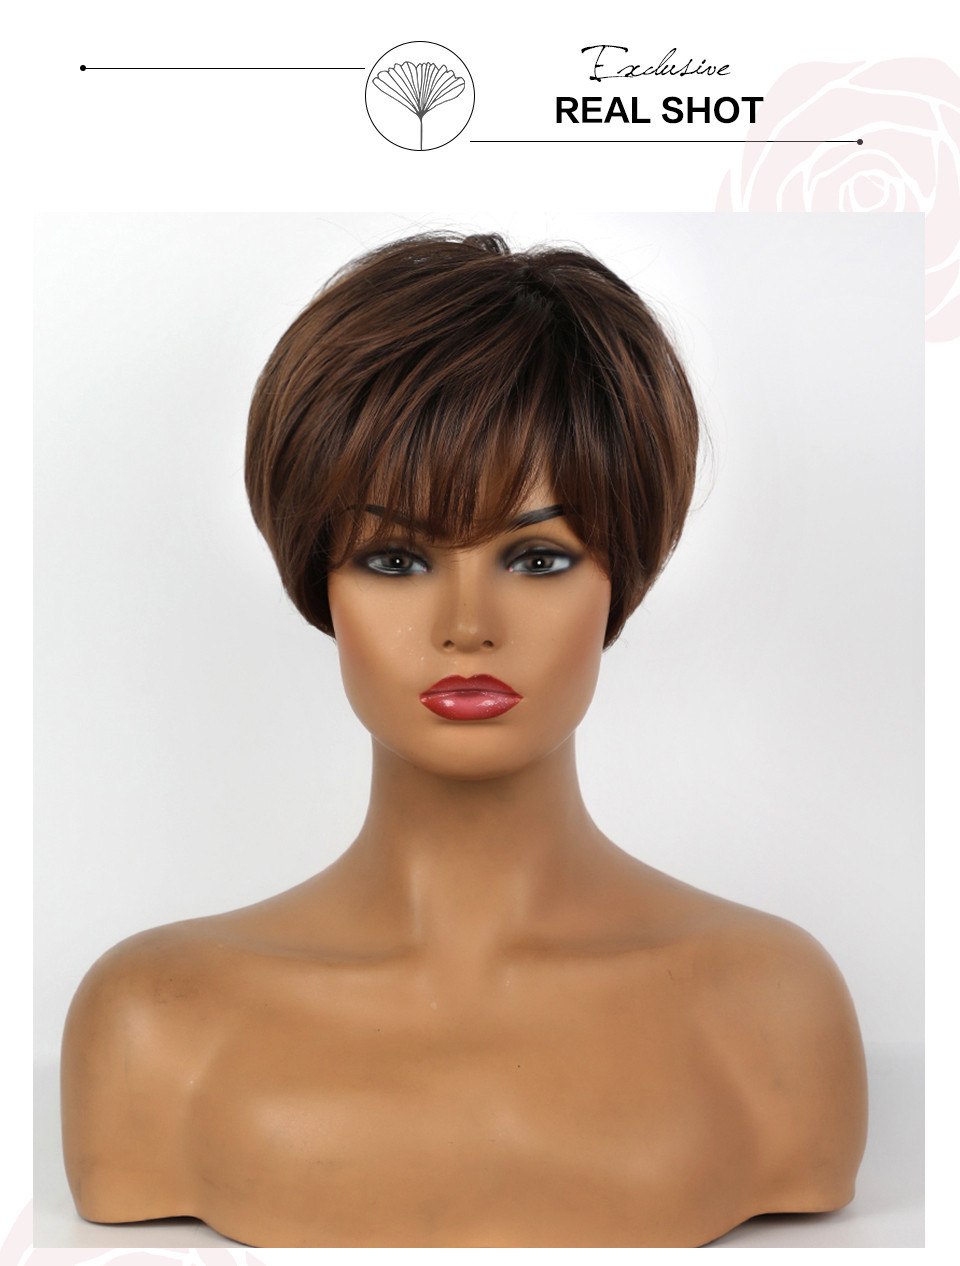 Boy Cut Hairstyle Short Synthetic Hair Natural Straight Women Wig 10 Inches